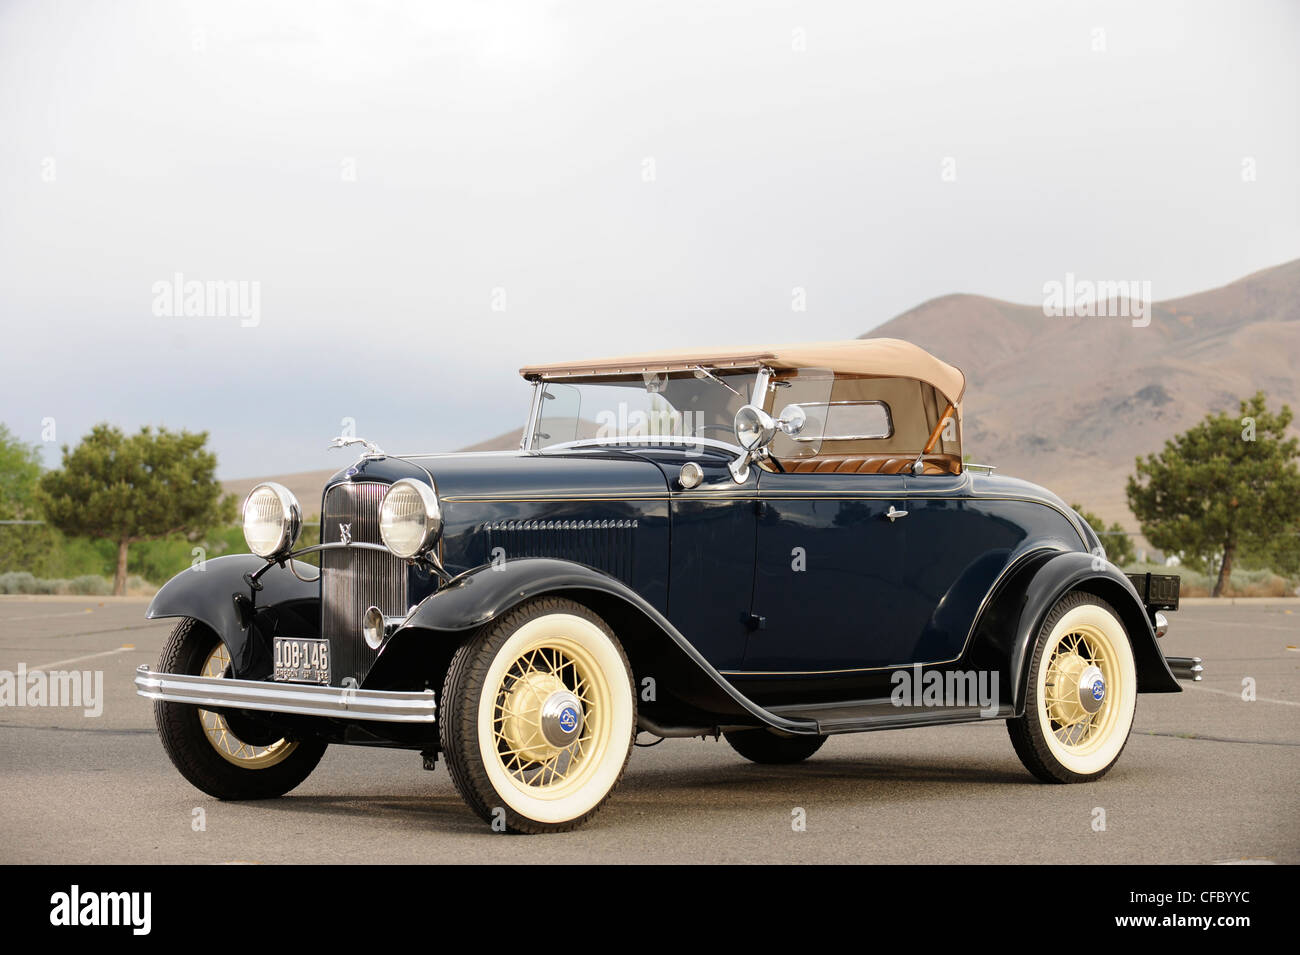 1932 Ford 18 V8 DeLuxe roasdster Stock Photo